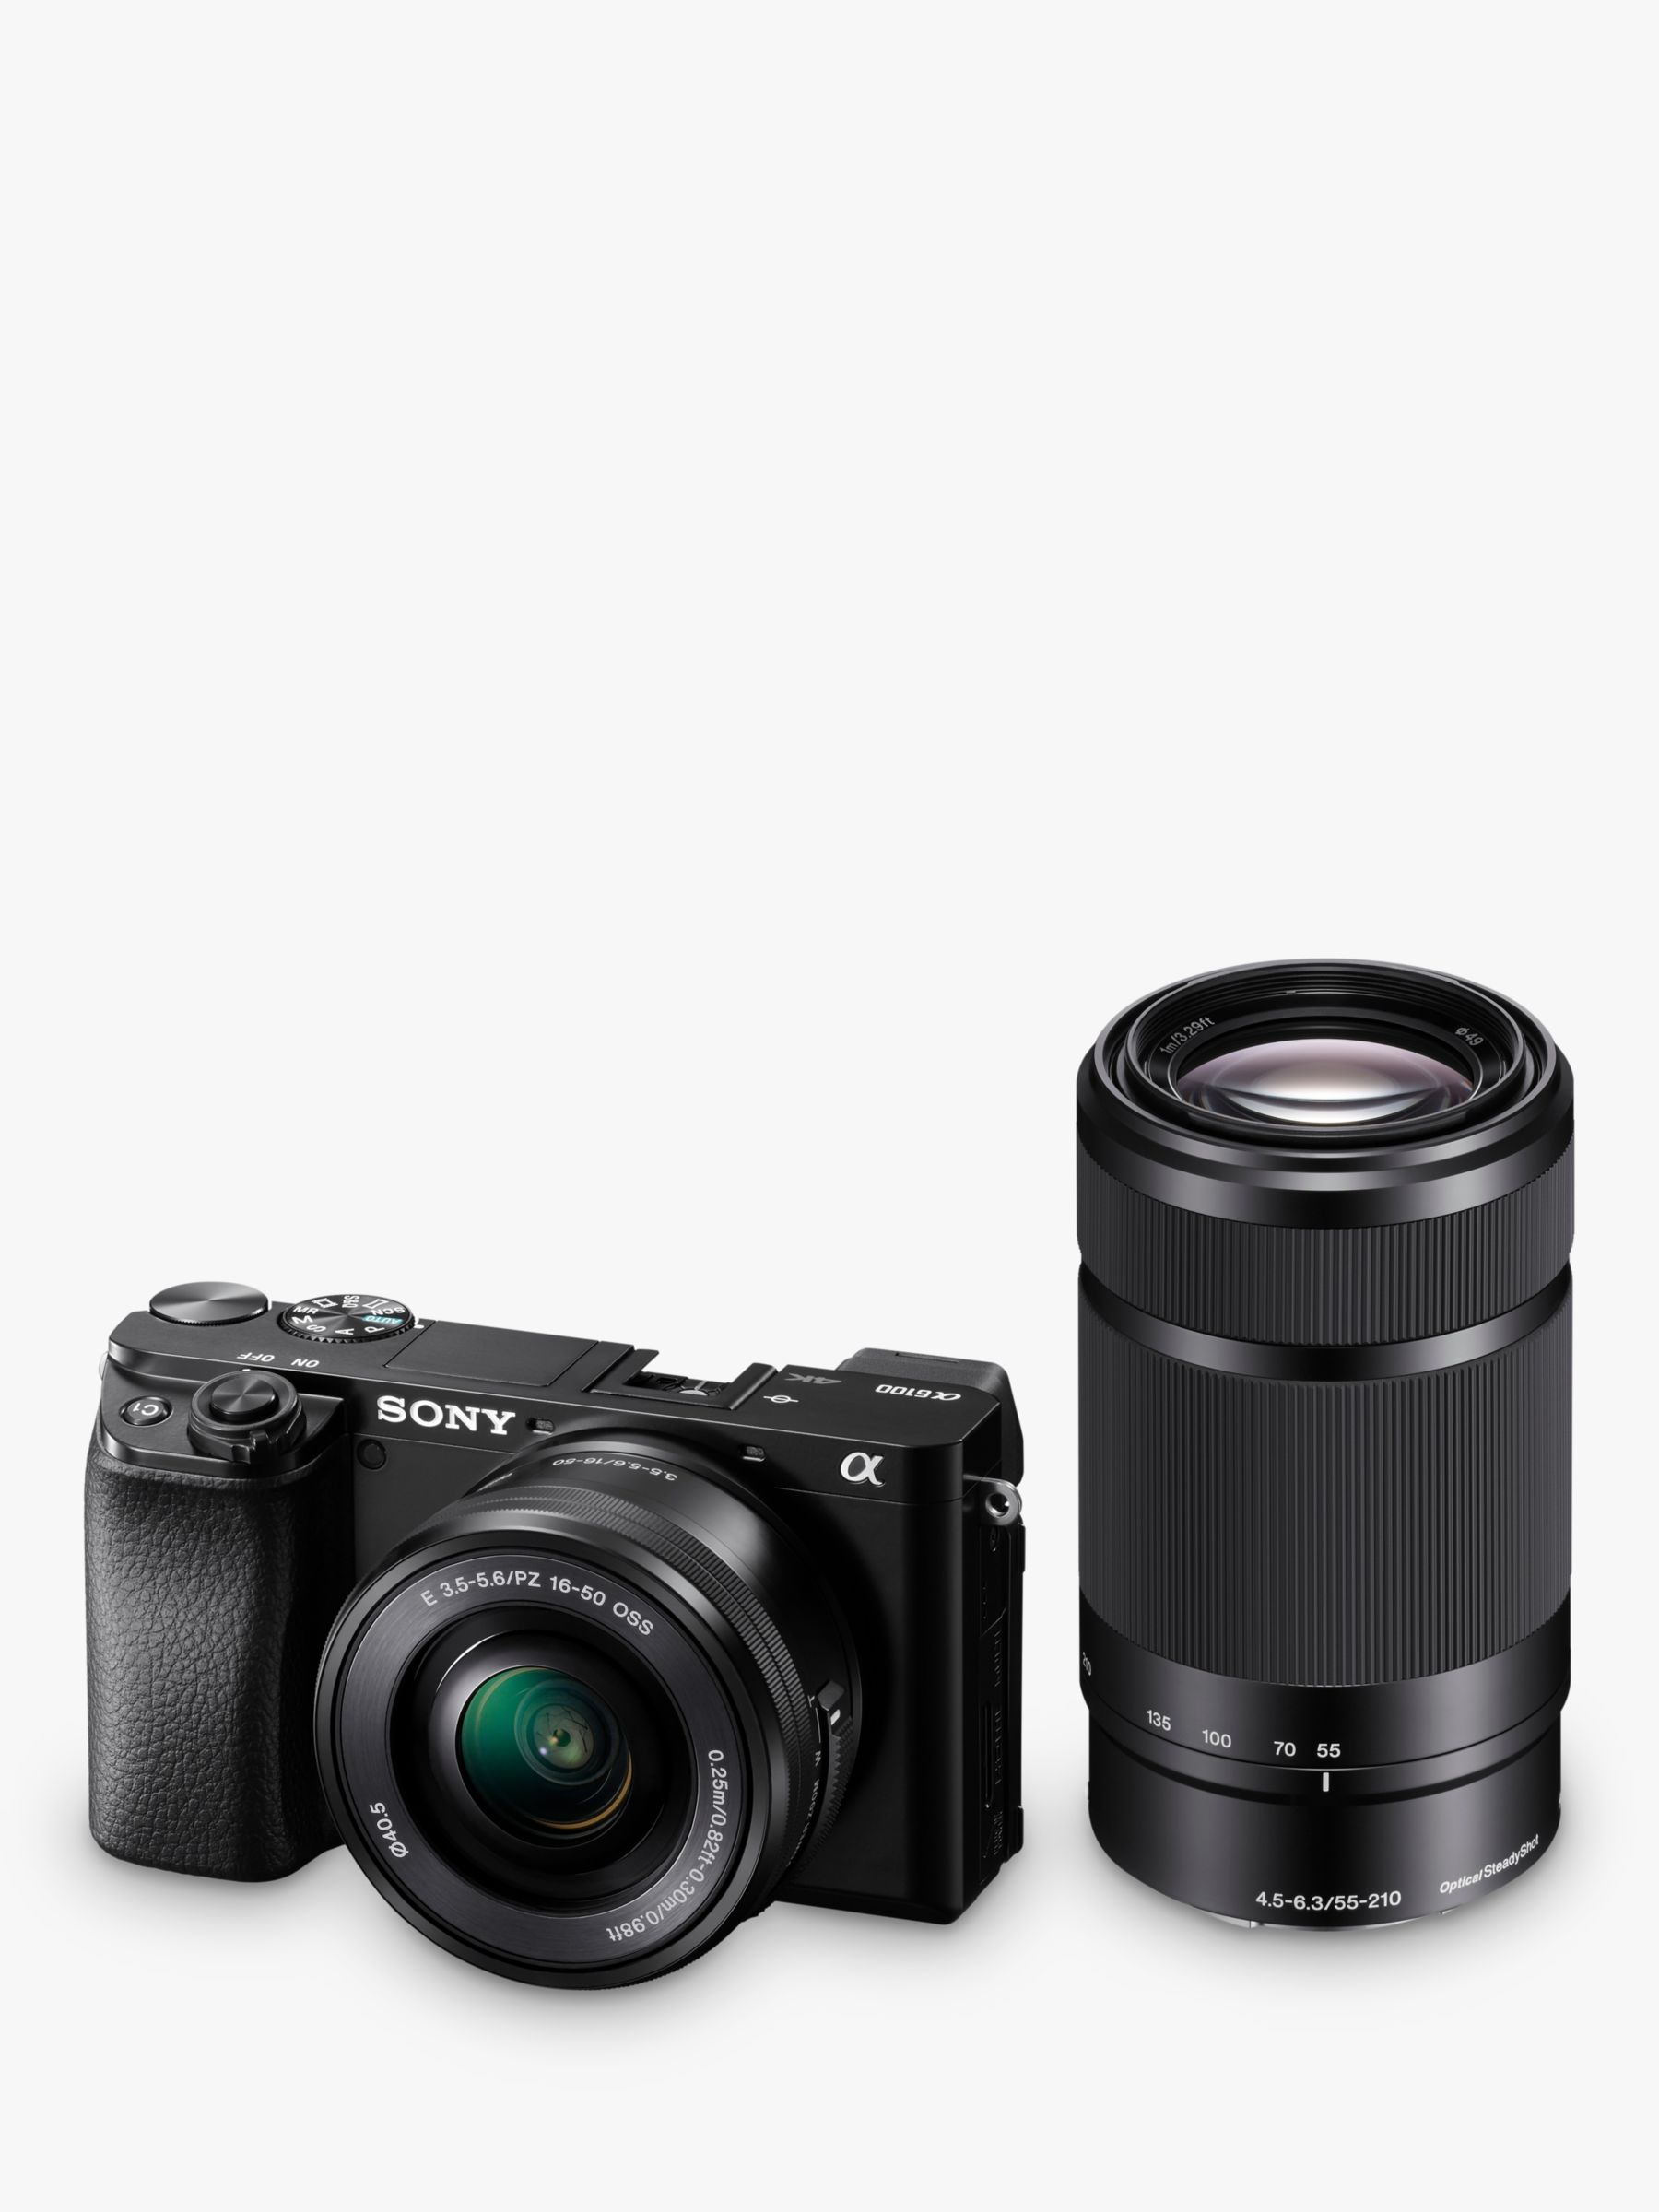 Image of Sony A6100 Compact System Camera with 1650mm OSS Lens and 55210mm OSS Lens 4K Ultra HD 242MP WiFi Bluetooth NFC EVF 3 Tilting Touch Screen Double Zoom Lens Kit Black